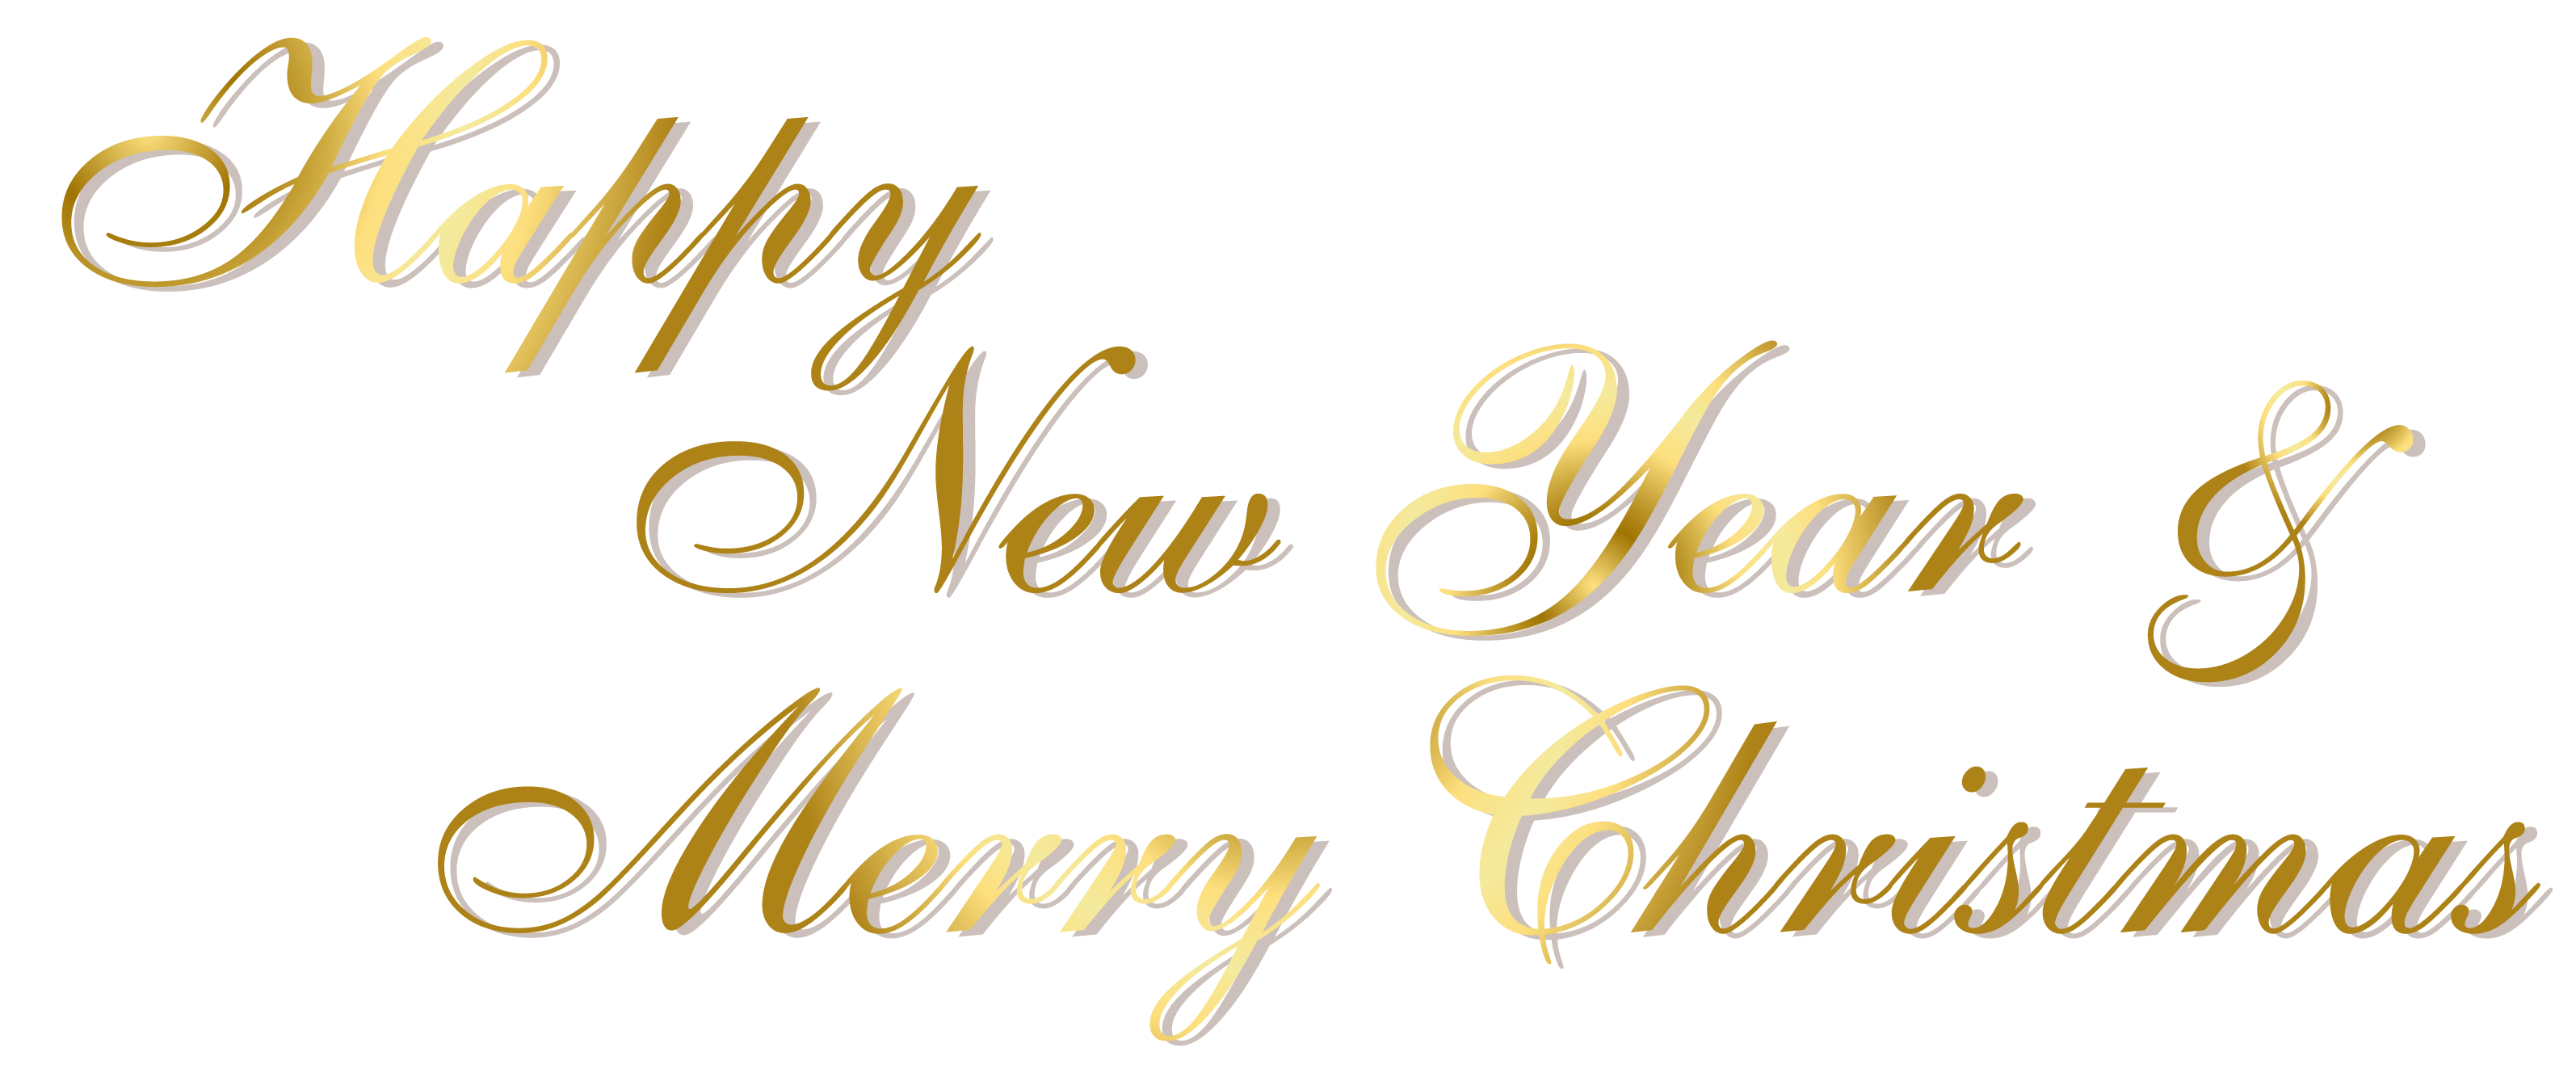 gold clipart new years eve